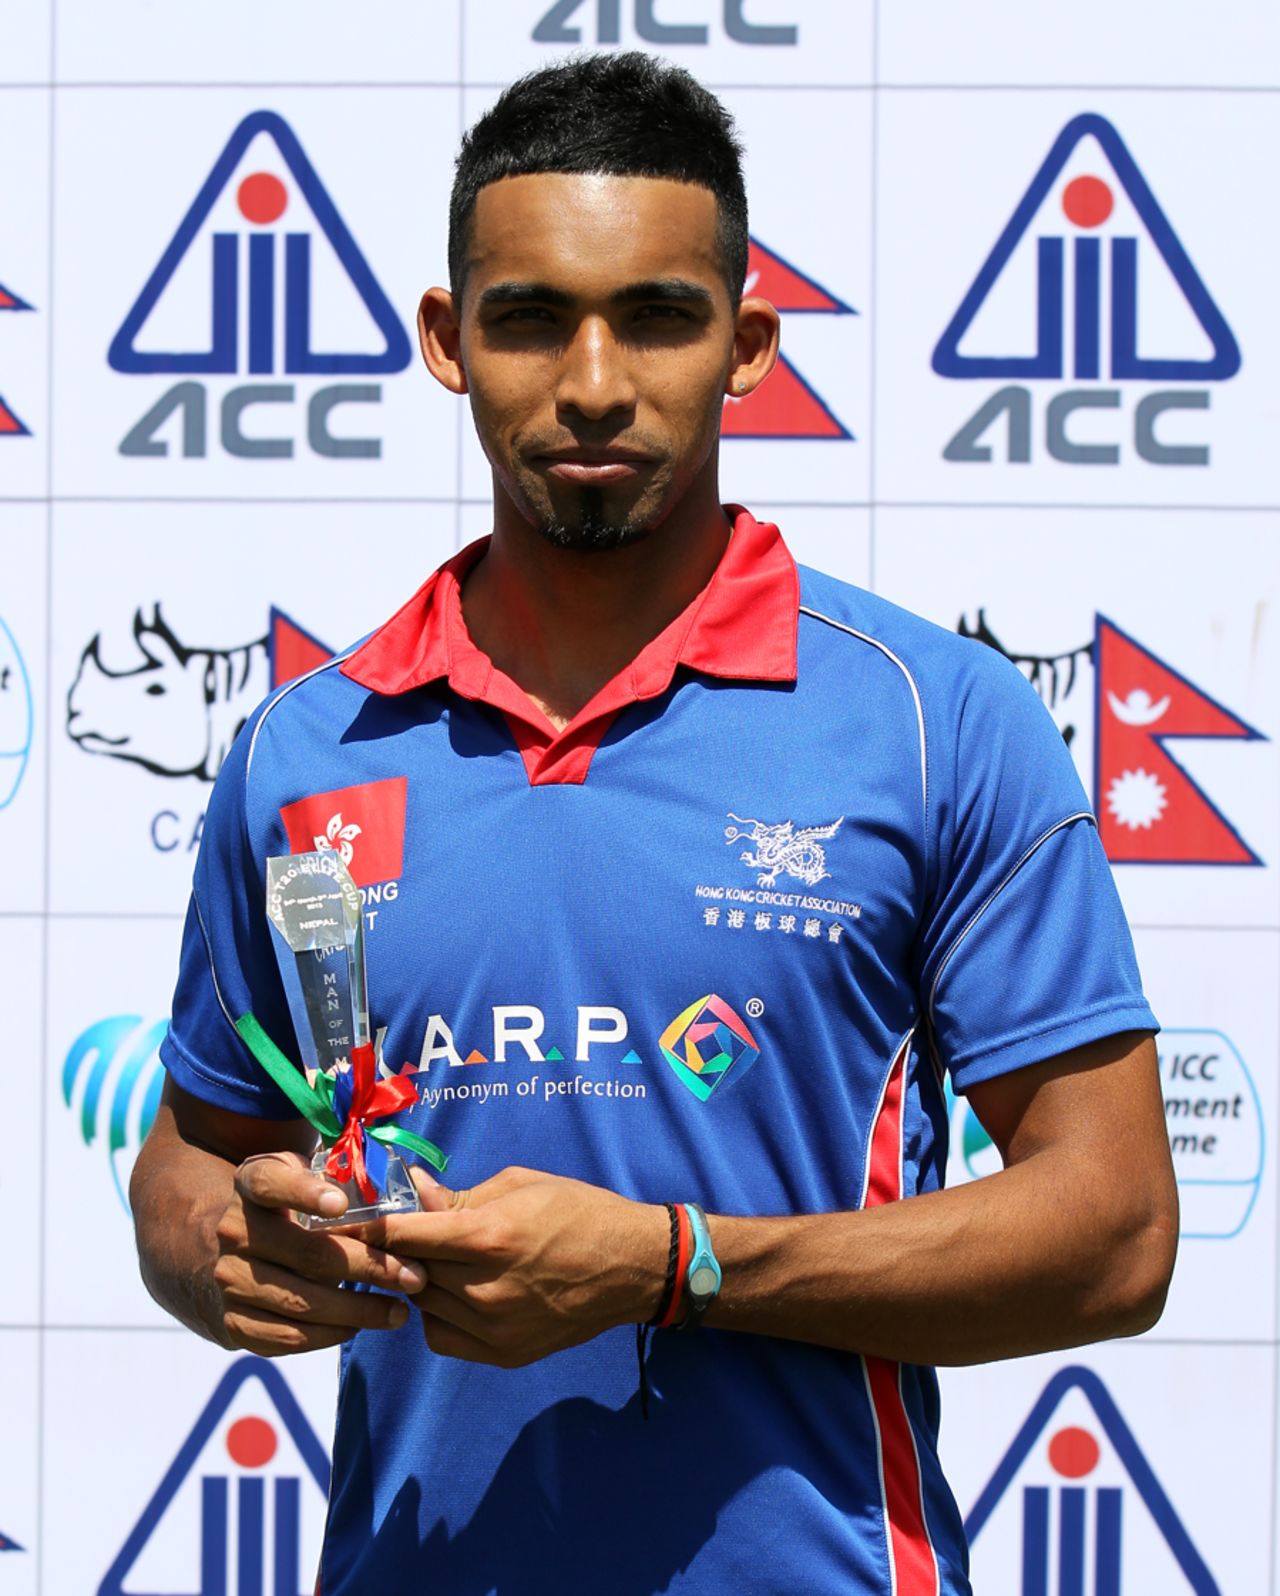 Irfan Ahmed picked up the Man of the Match award against Malaysia at the ACC Twenty20 Cup 2013 in Nepal